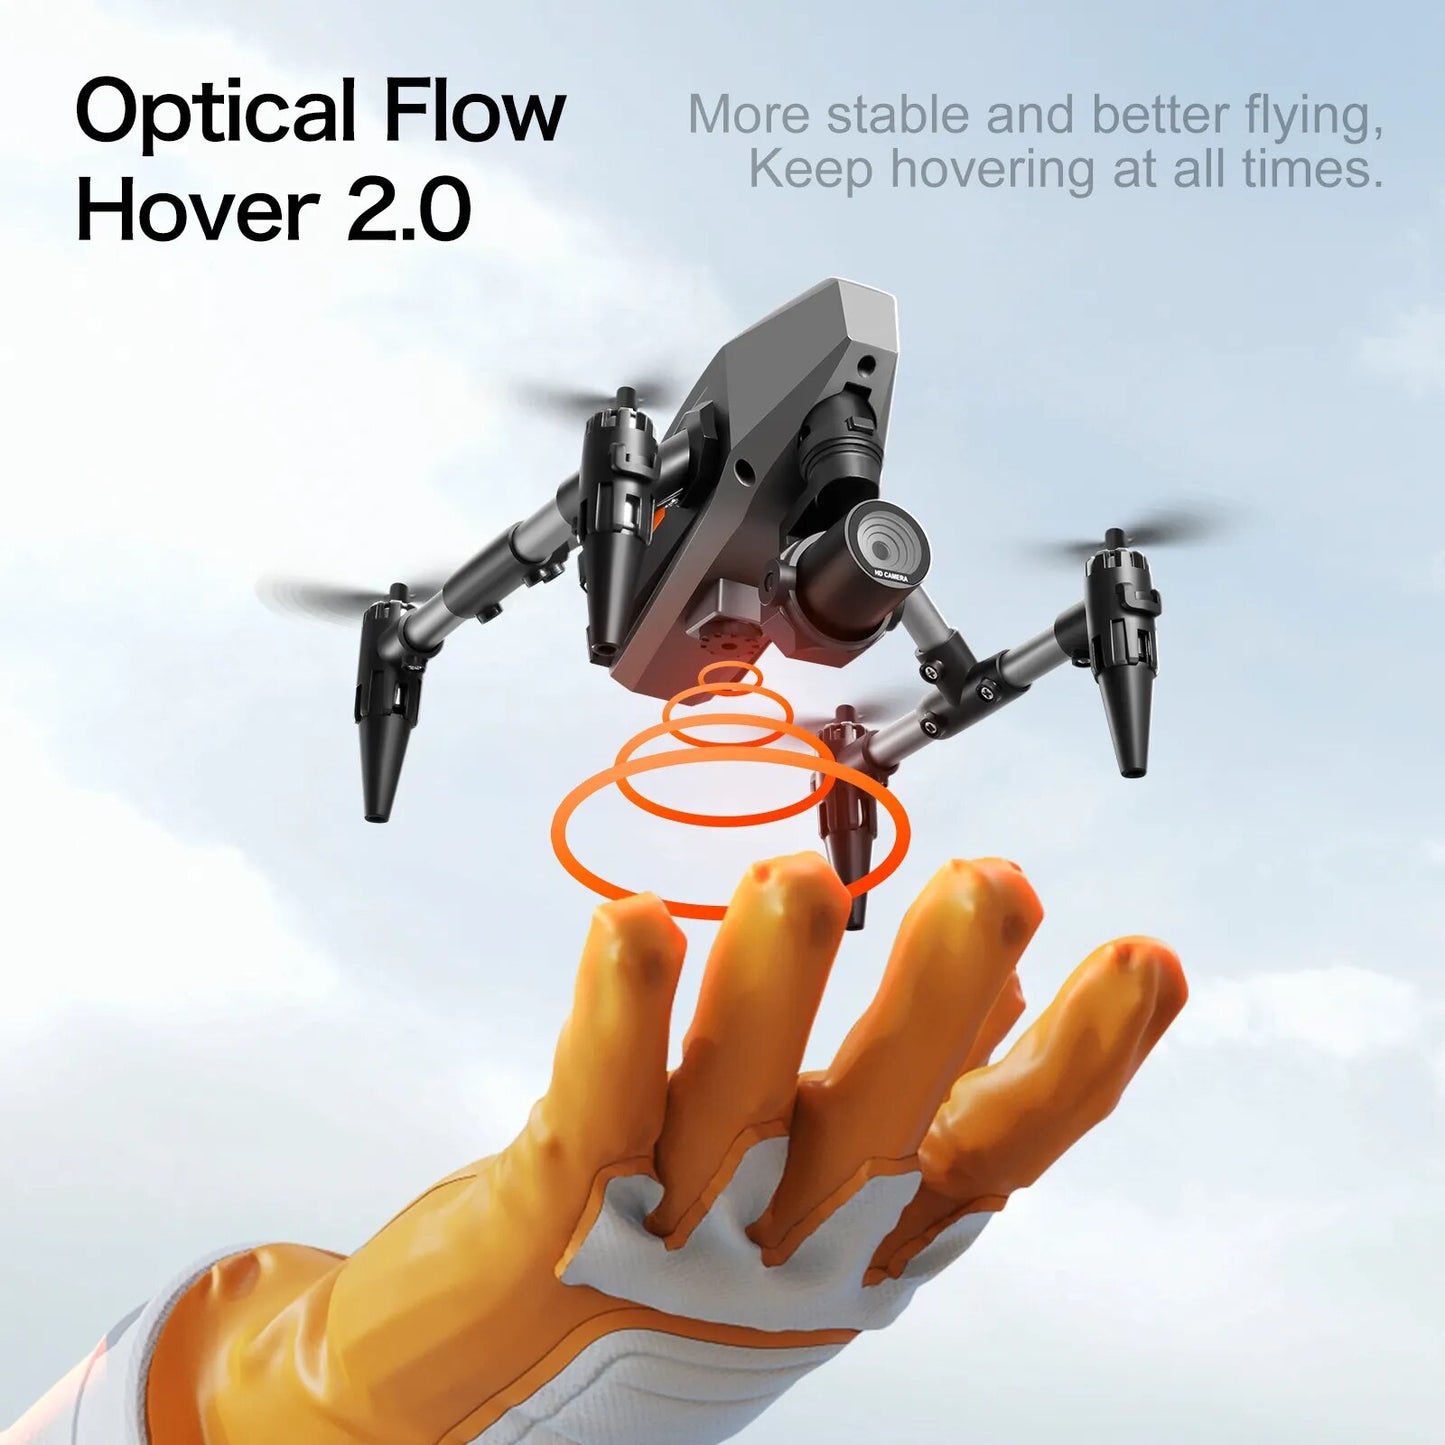 XD1 Mini Drone, Optical Flow More stable and better flying; Keep hovering at all times .